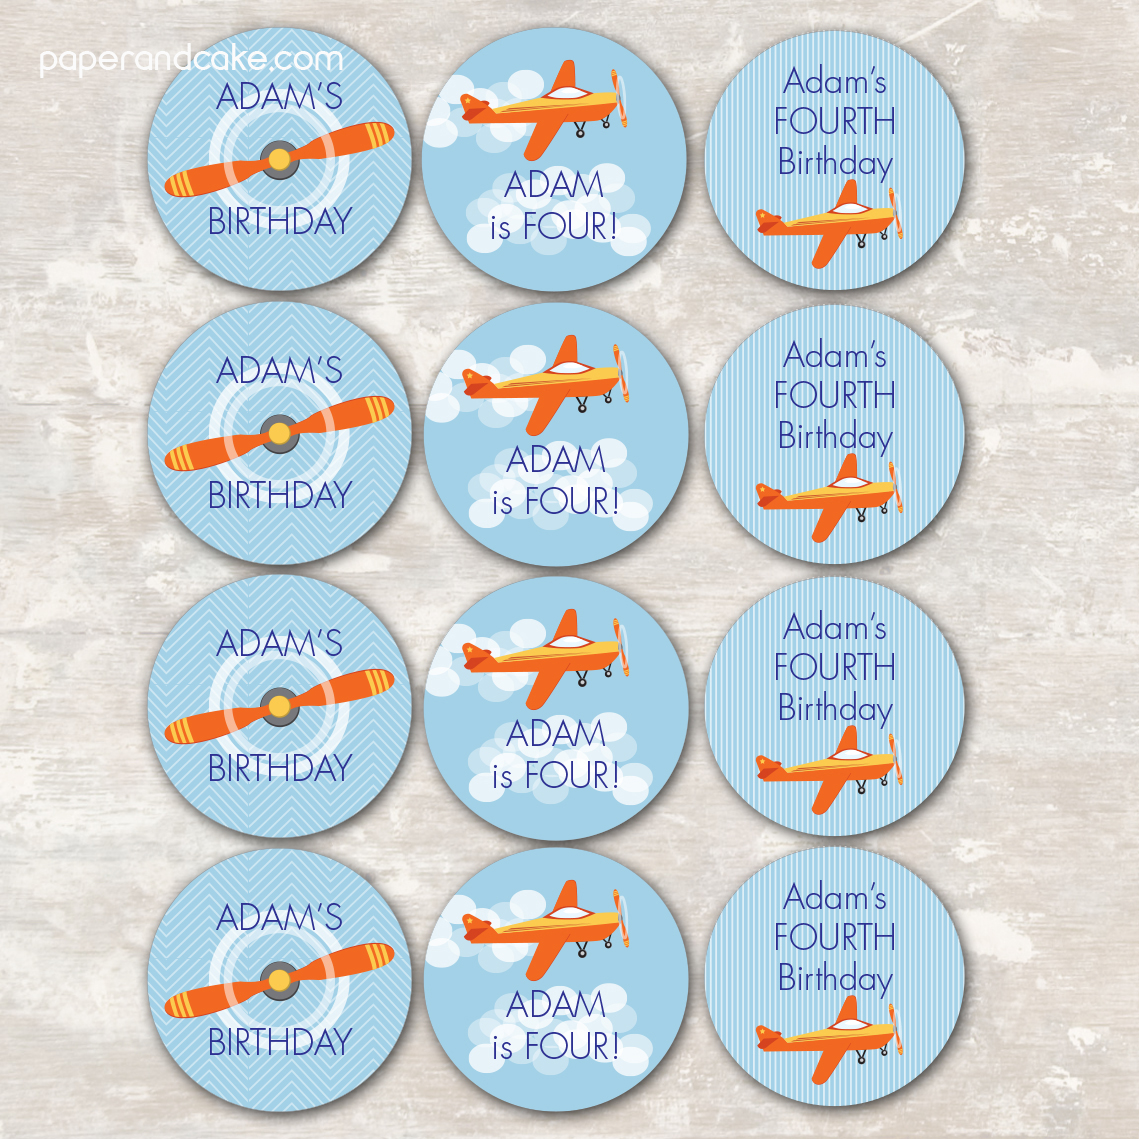 airplane-printable-birthday-party-paper-and-cake-paper-and-cake